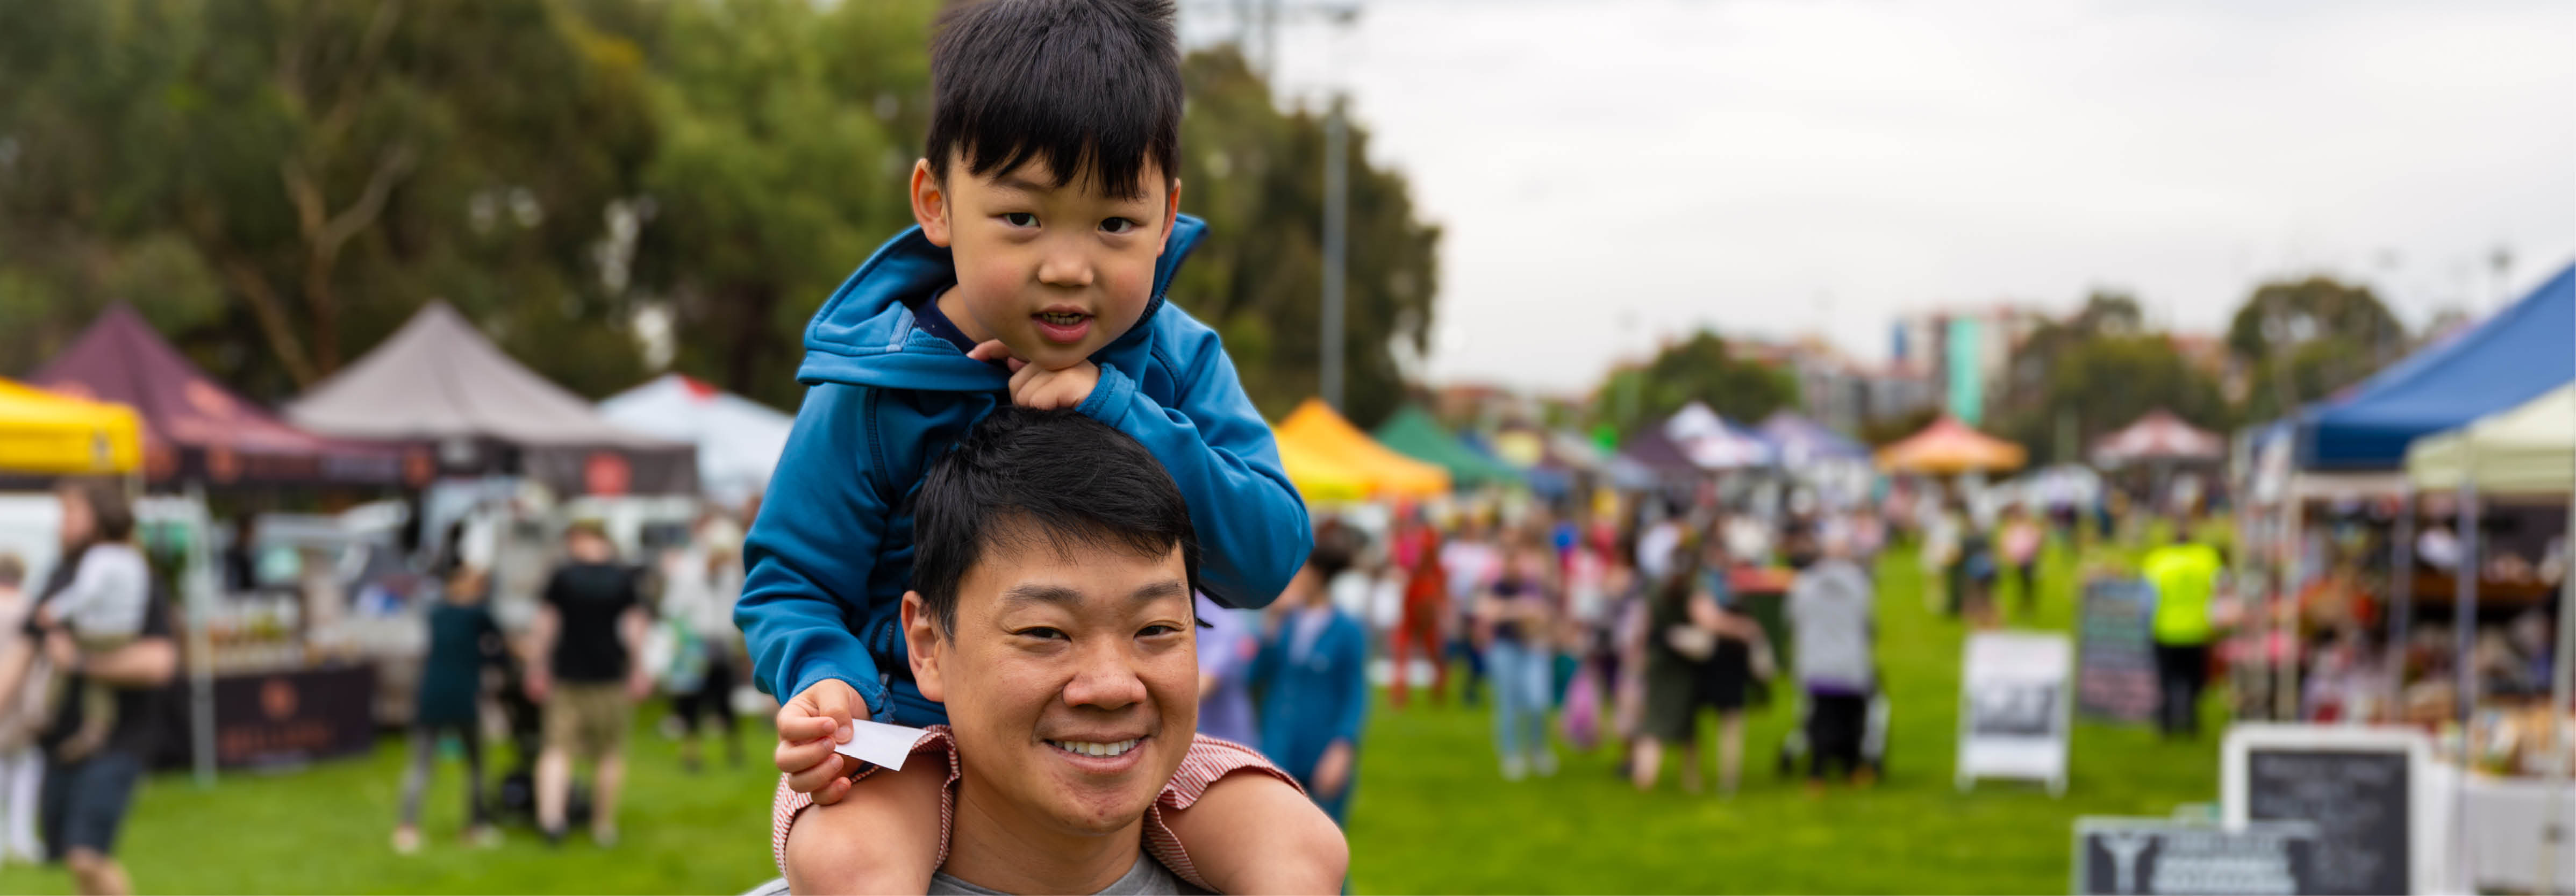 a man carries a young boy on his shoulders at an outdoor market with stalls and tents